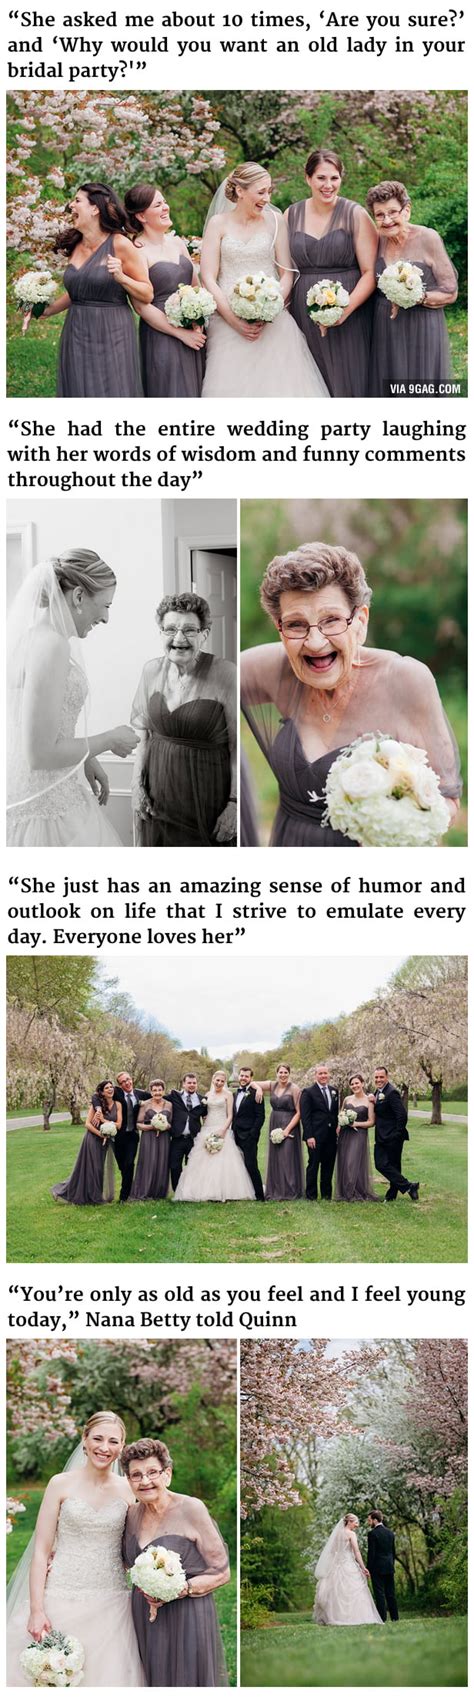 this bride invites her 89 year old grandma to be a bridesmaid at her wedding 9gag